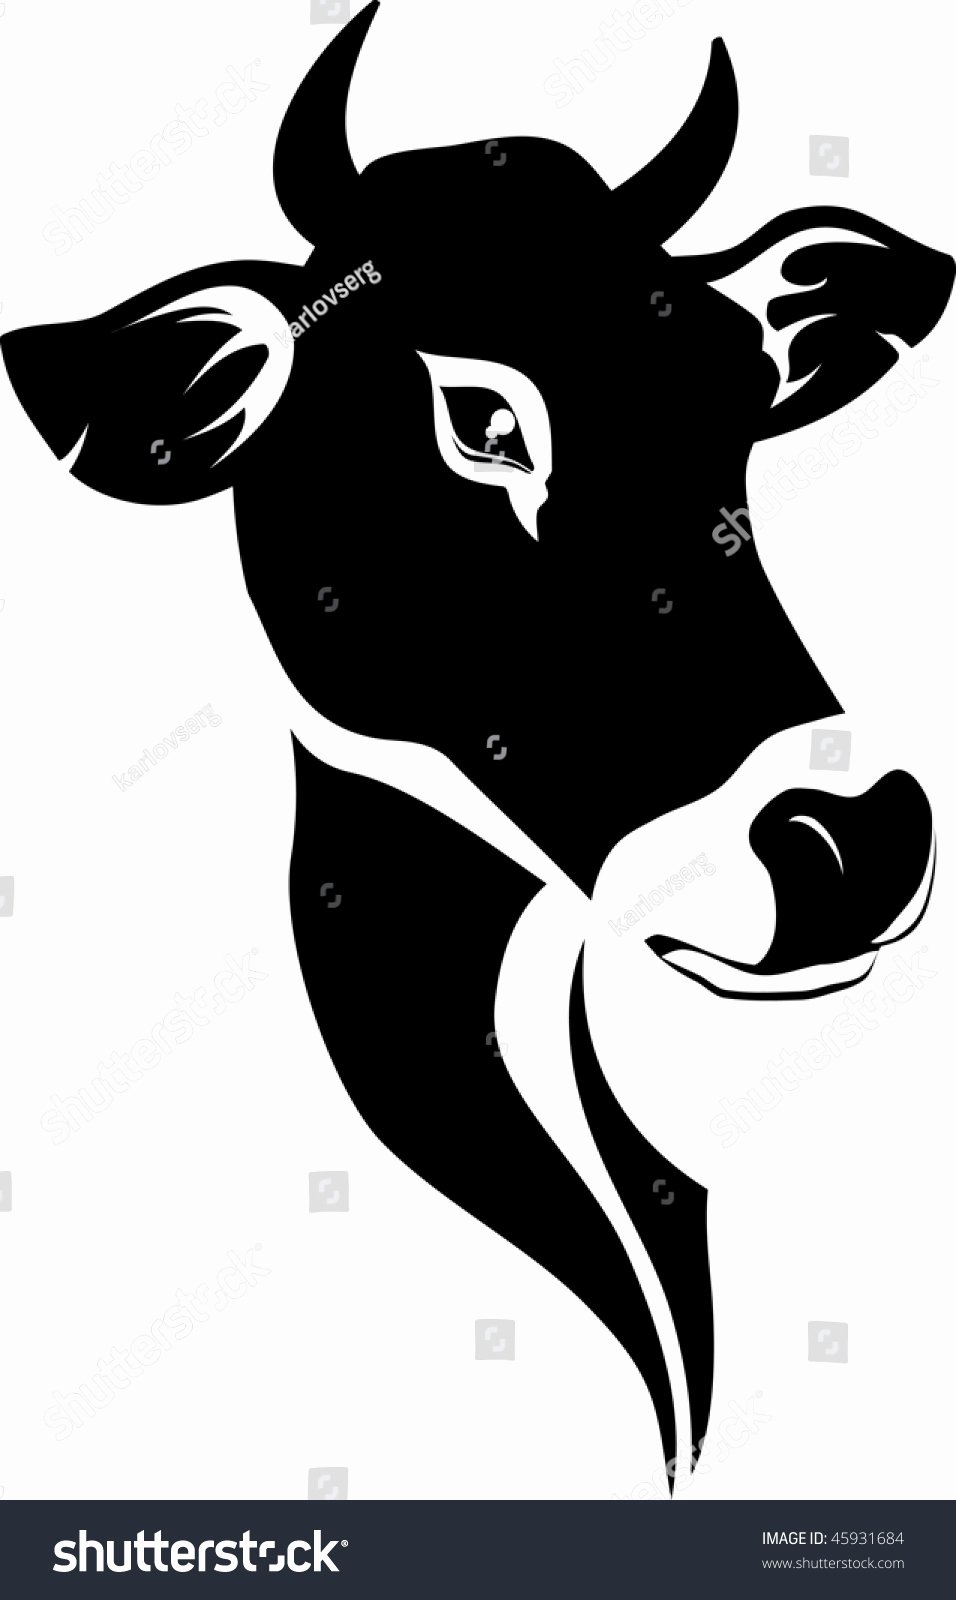 Black and White Illustration Awesome Vector Illustration A Cow Black and White Shutterstock